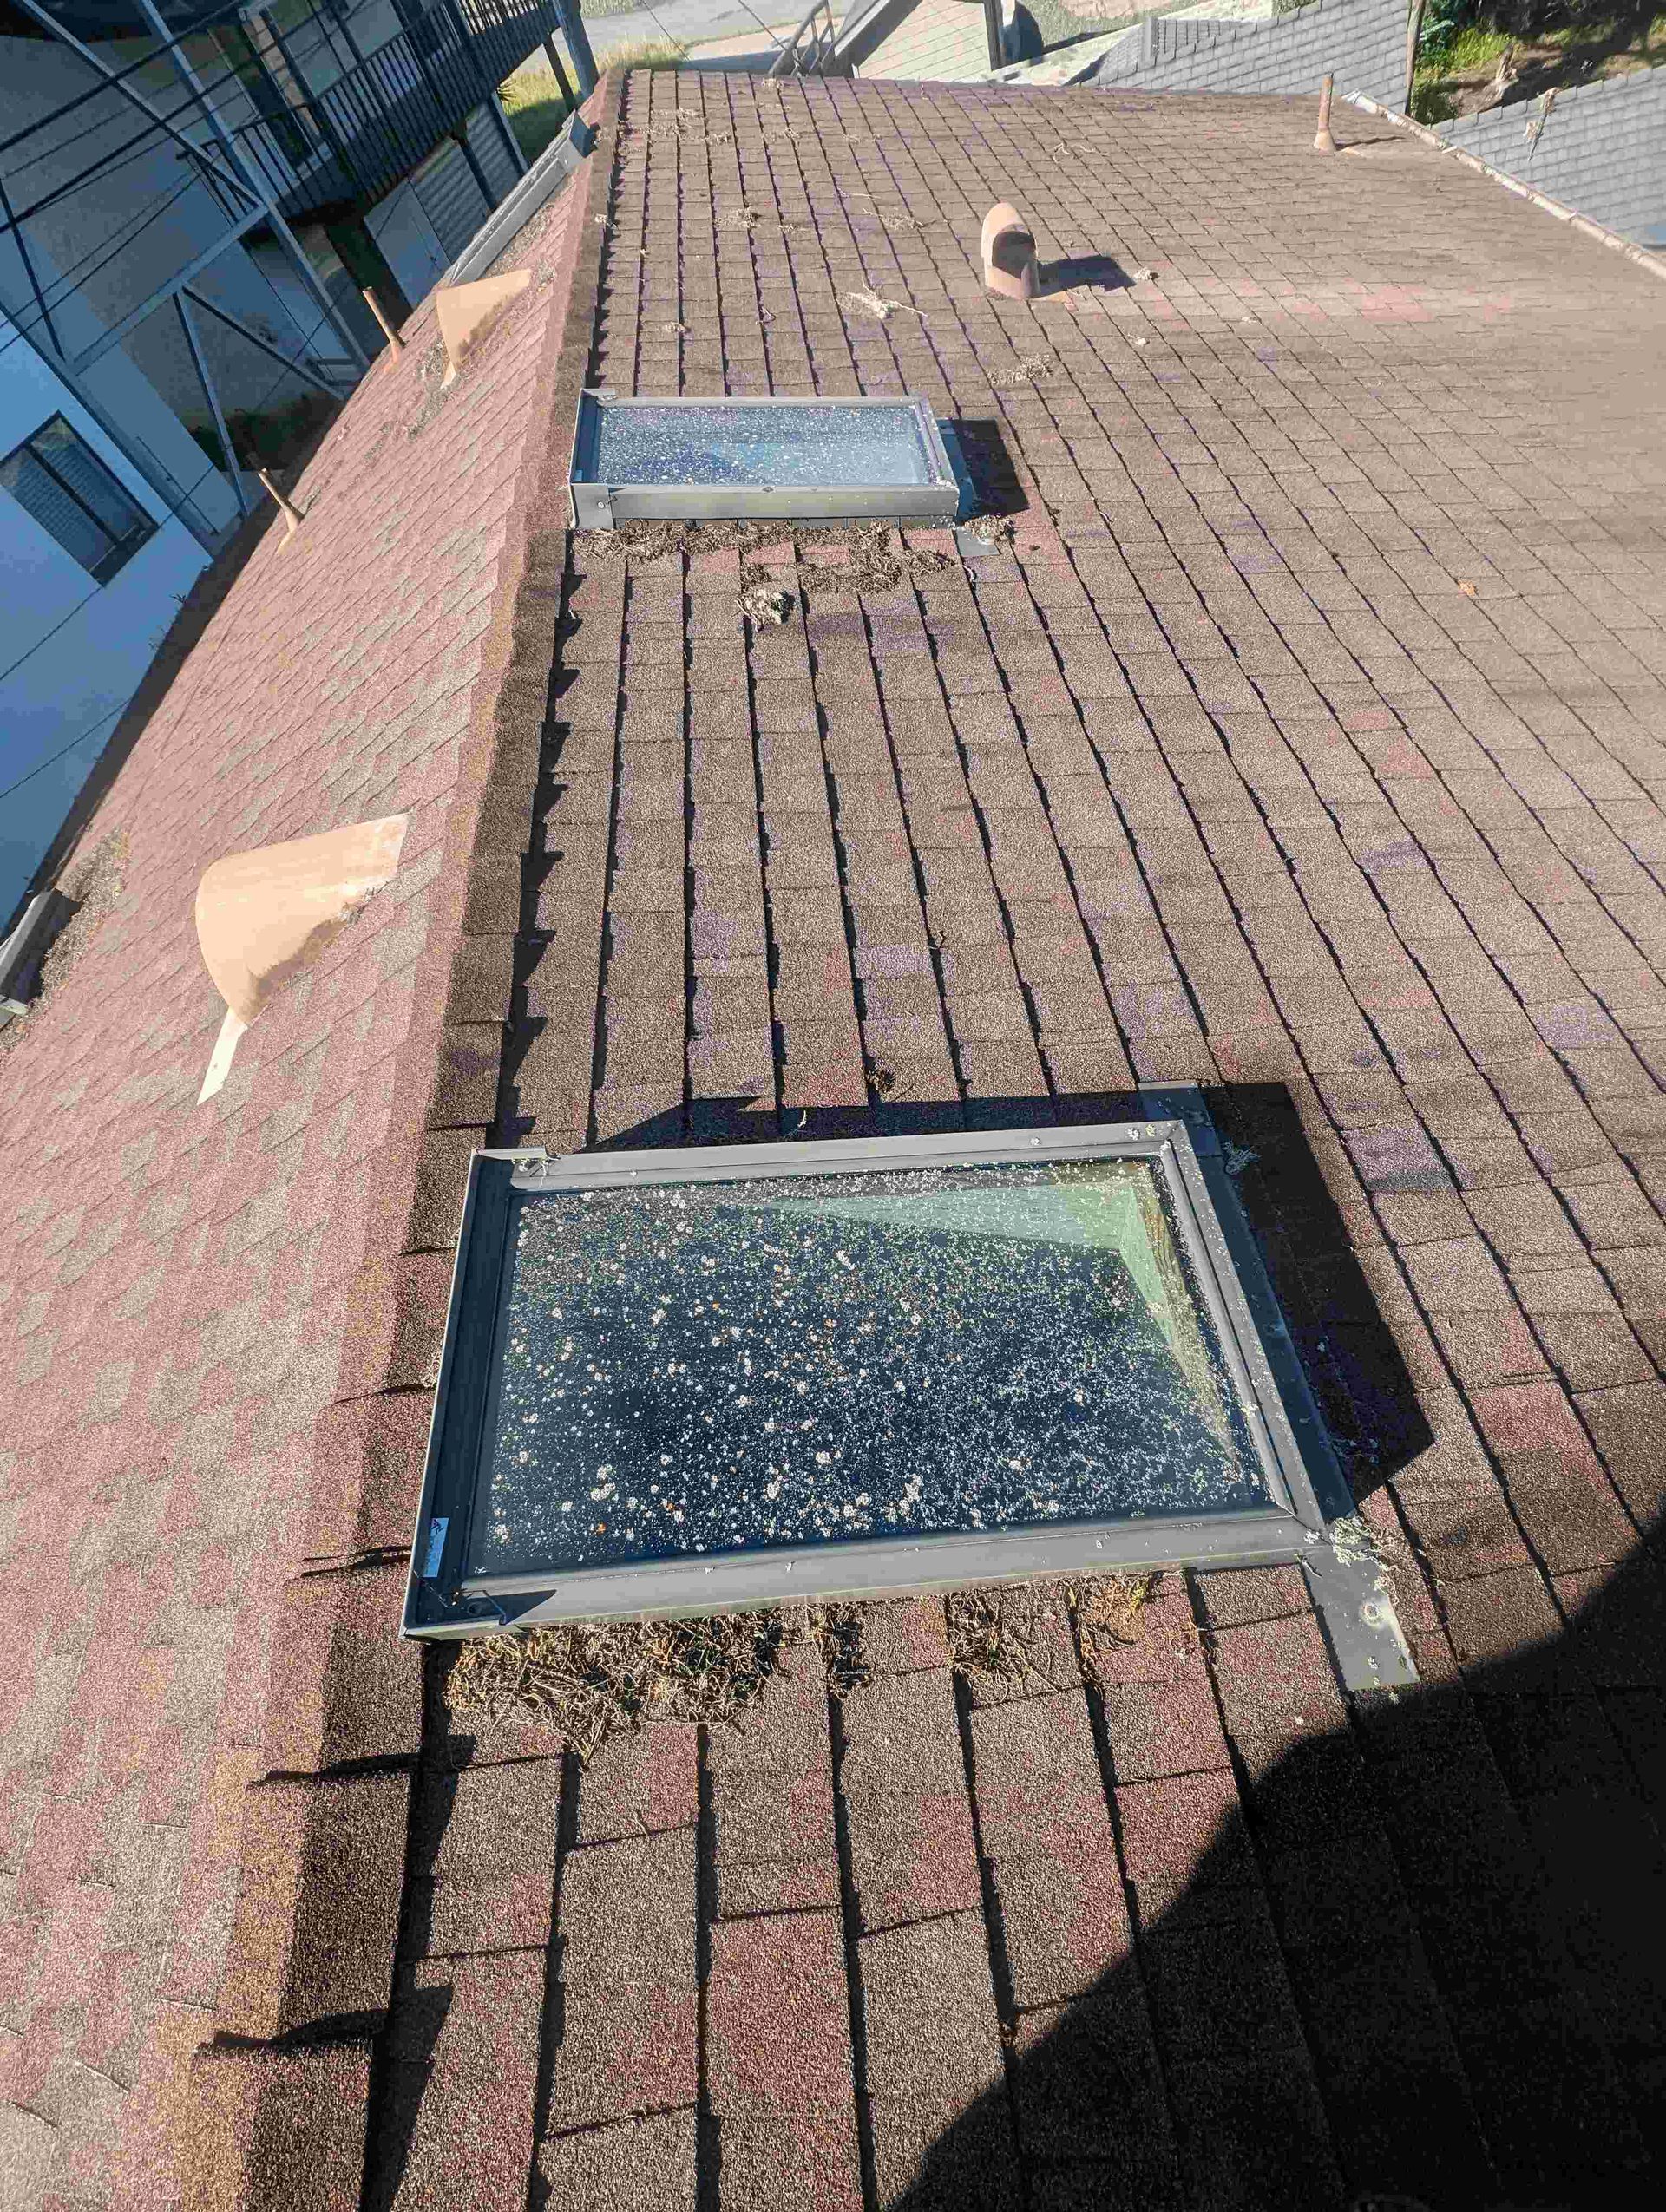 There are two skylights on the roof of a building.